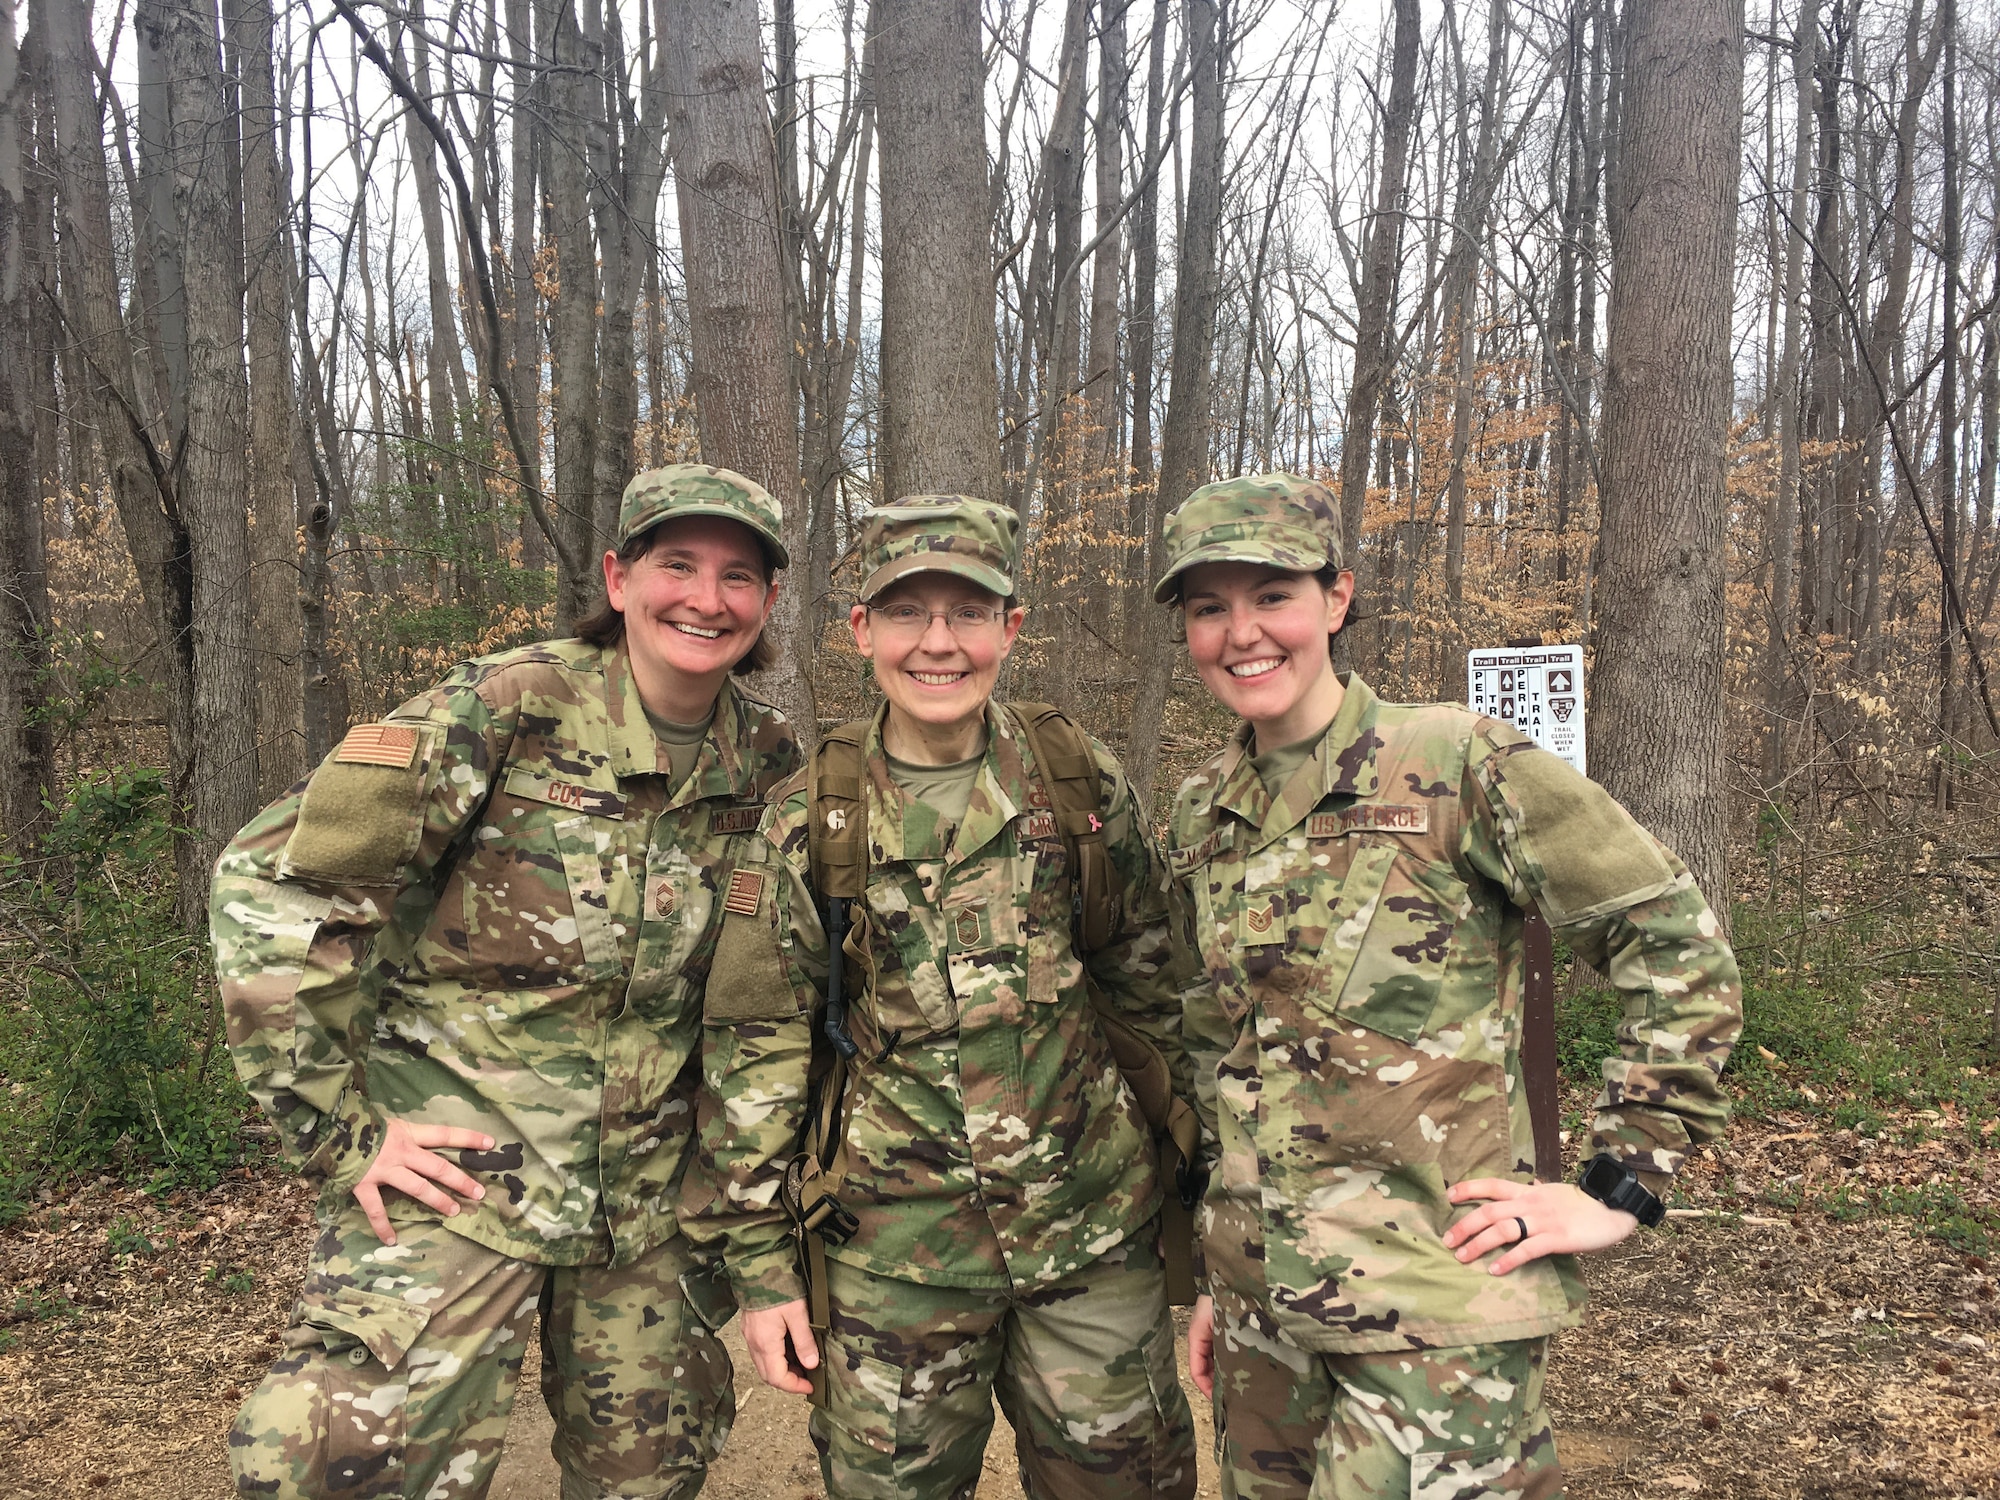 Left to right: CMSgt Jennifer Cox, CMSgt Deborah Volker, TSgt Jilian McGreen
This picture was taken 2/3rds of the way through the 26.2 mile march on 15 March 2020.